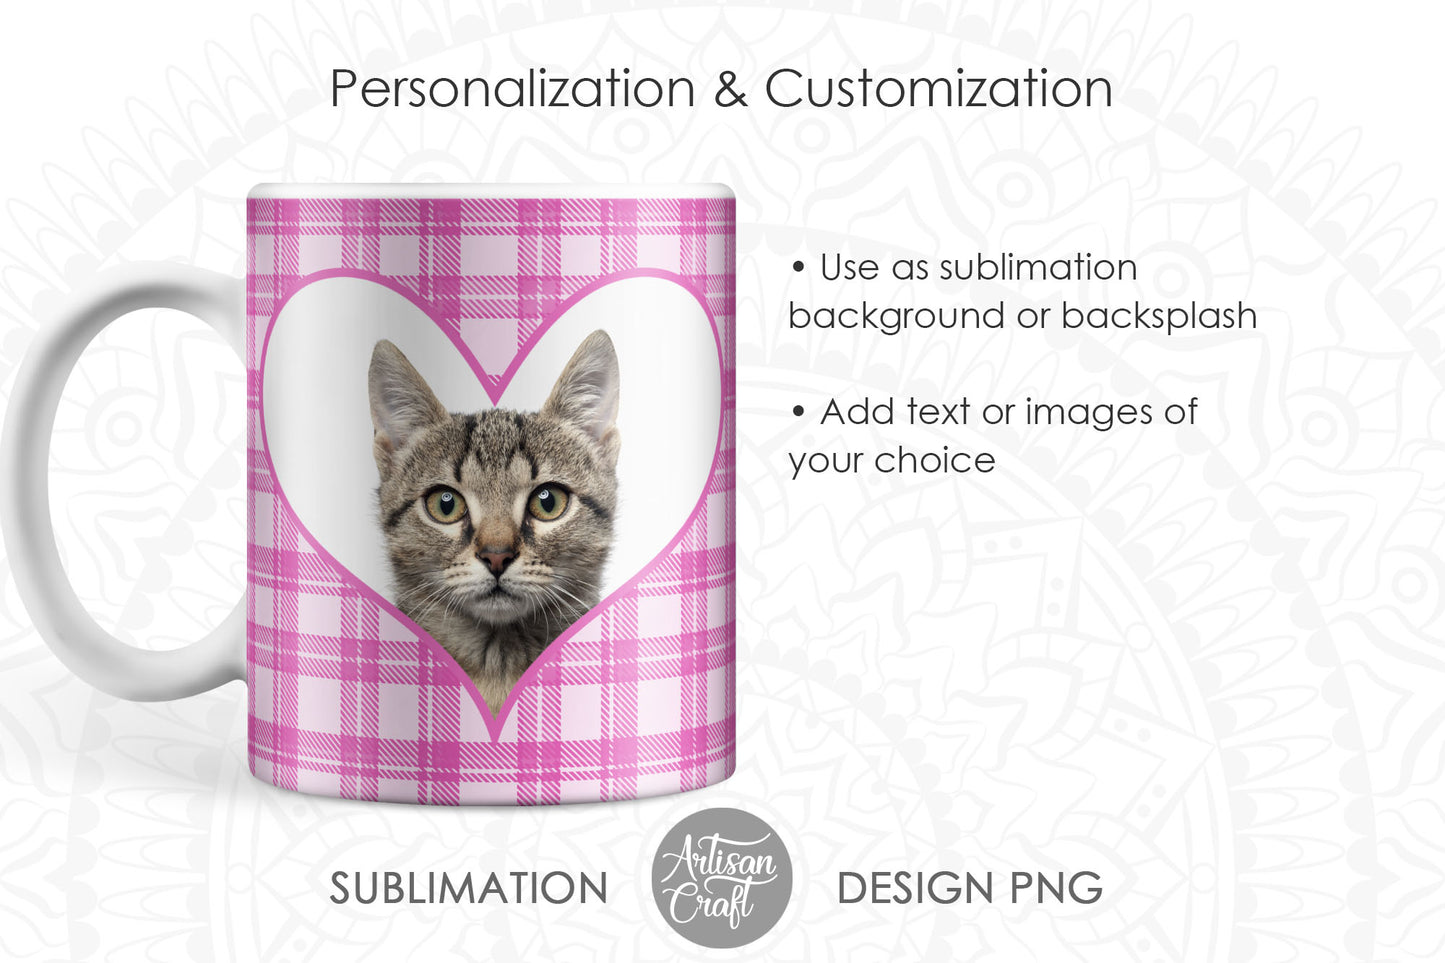 Photo mug sublimation designs with pink plaid hearts